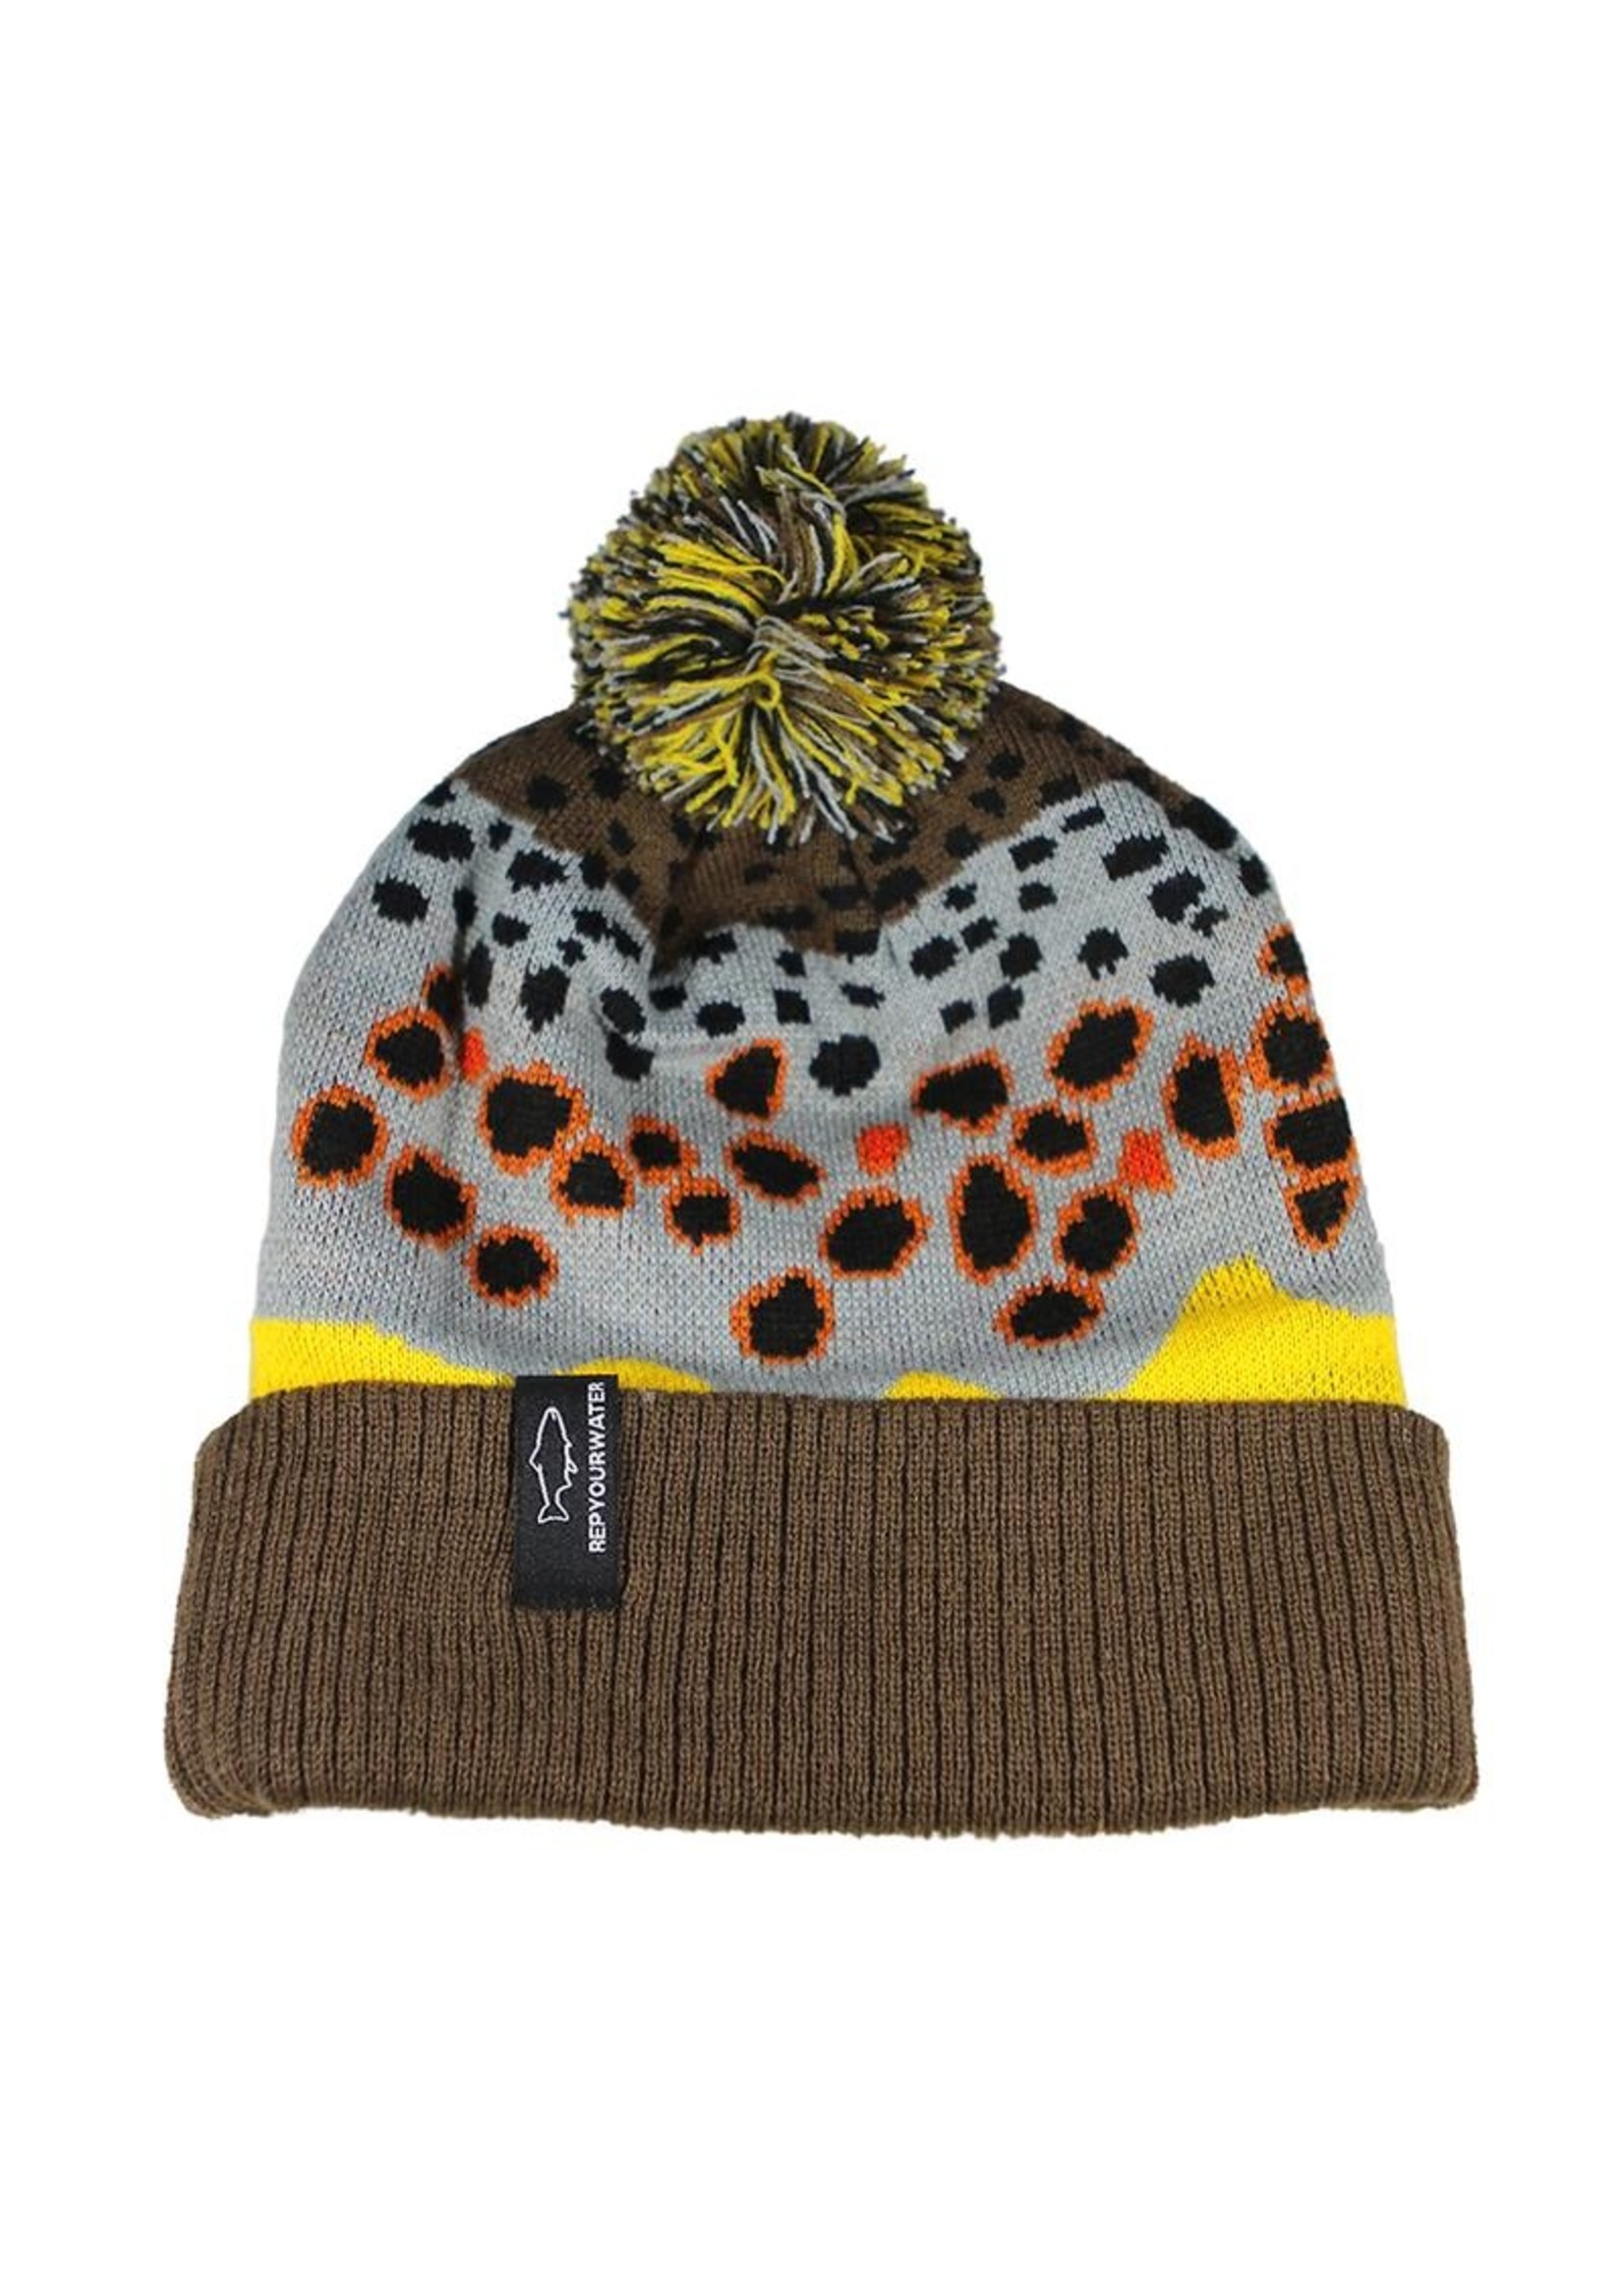 REP YOUR WATER TROUT BEANIES